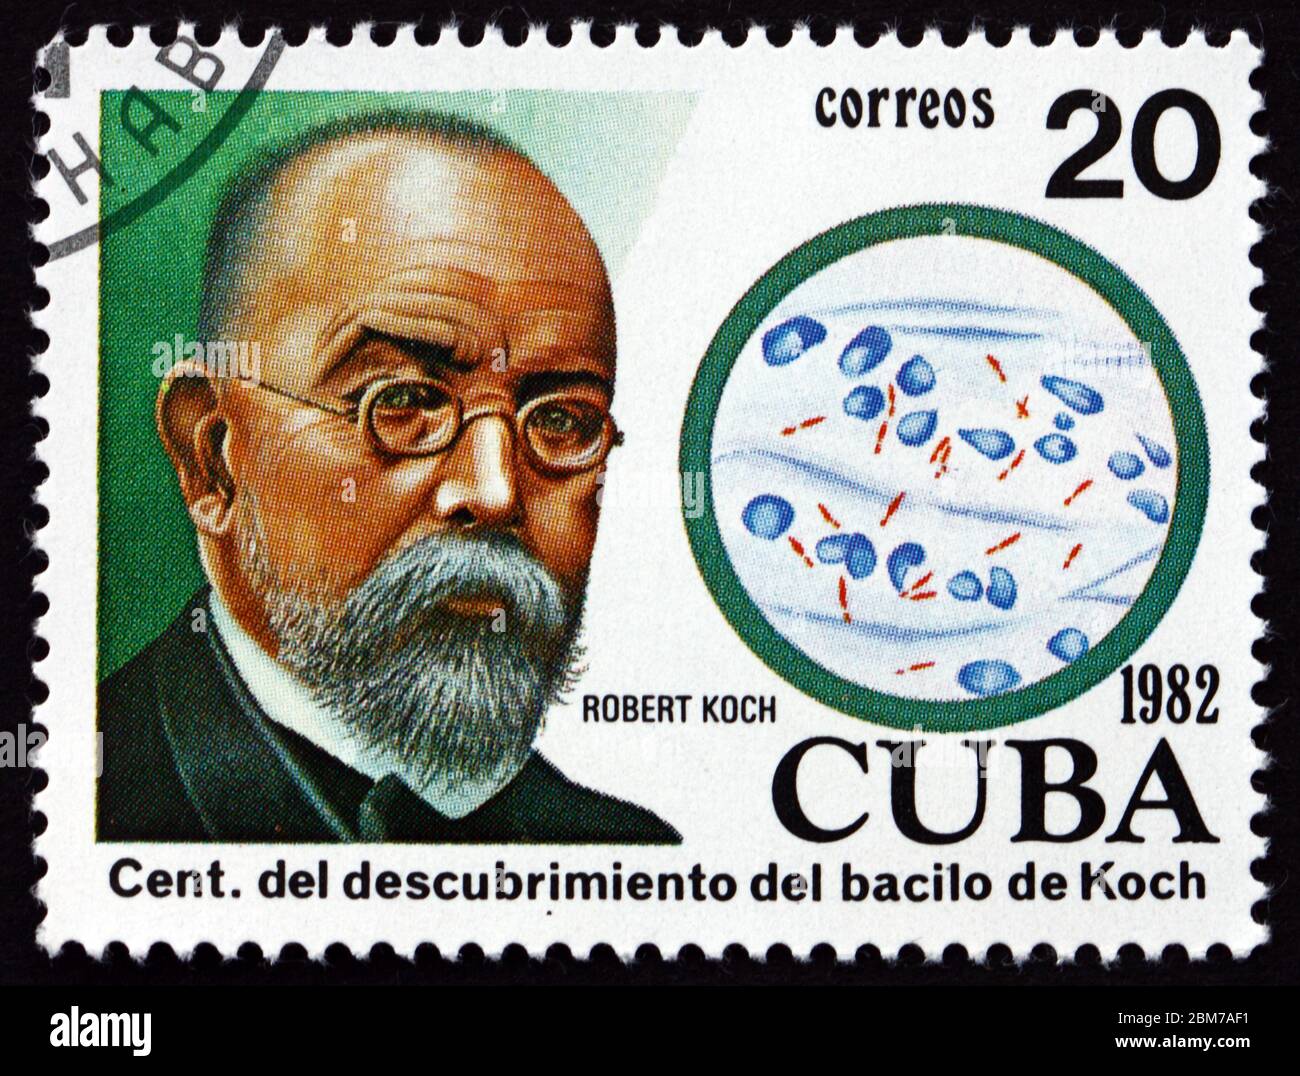 CUBA - CIRCA 1982: a stamp printed in Cuba dedicated to discovery of the tubercle bacillus by dr. Robert Koch, circa 1982 Stock Photo